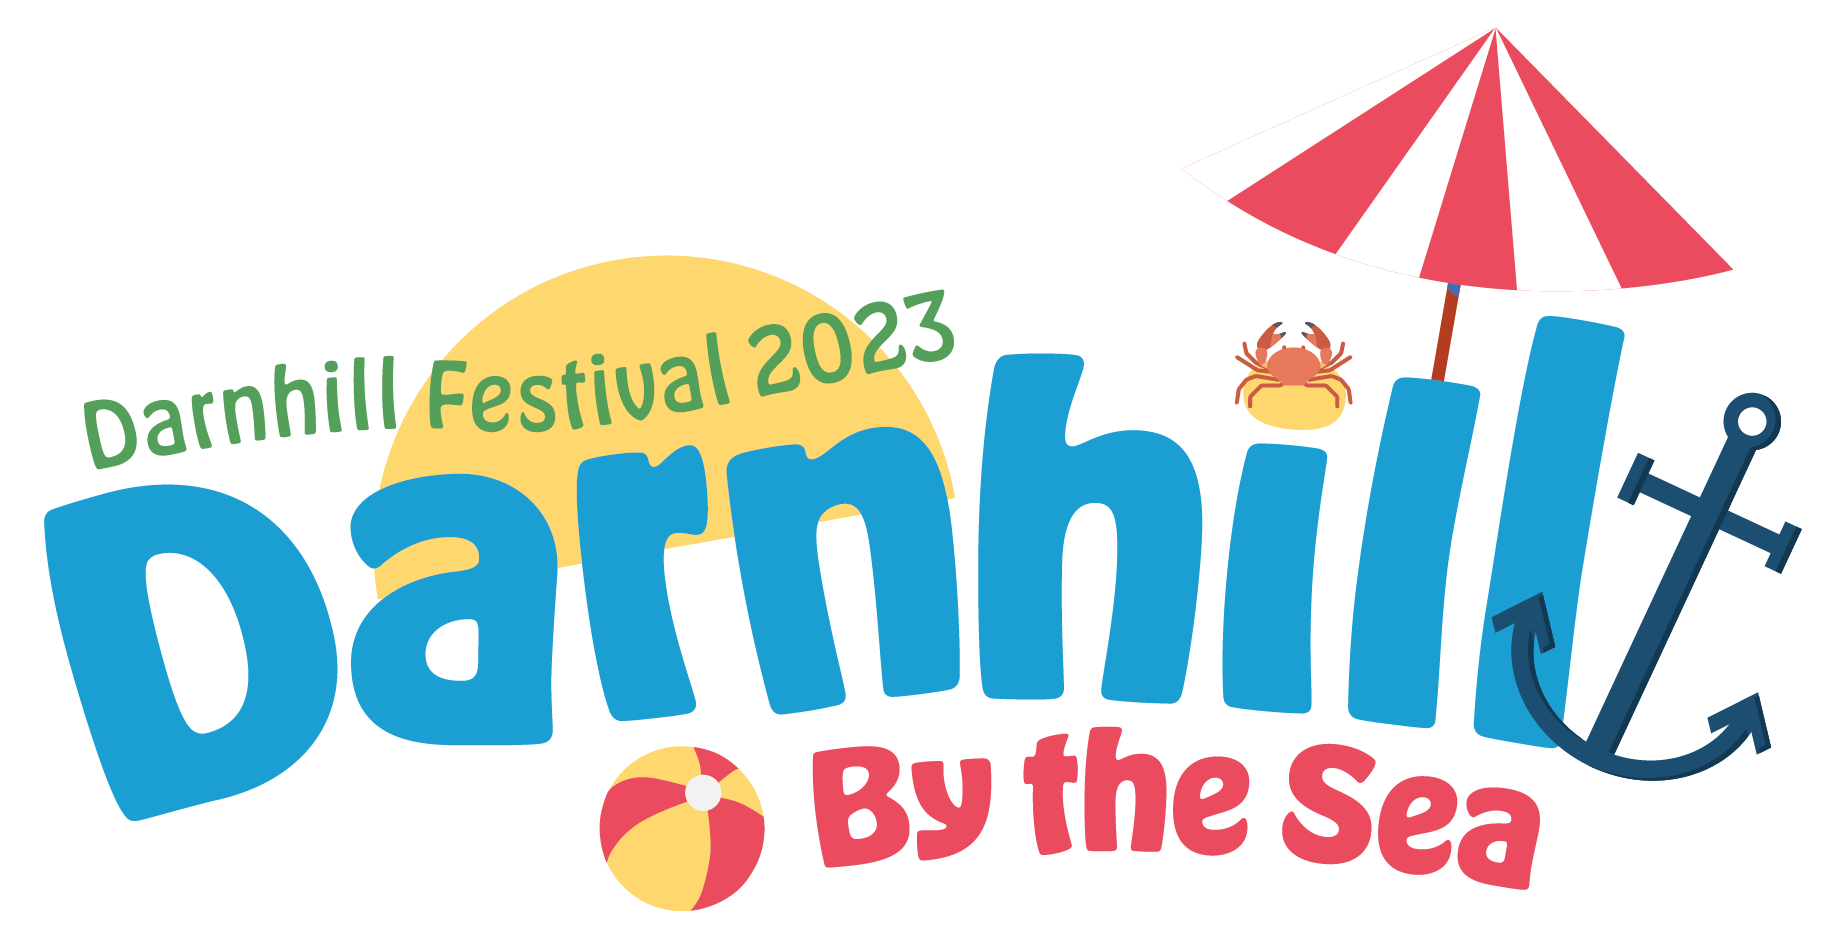 This is the Darnhill festival logo for 2023 the image reads darnhill by the sea it has a sun in the background and a red beach umbrella